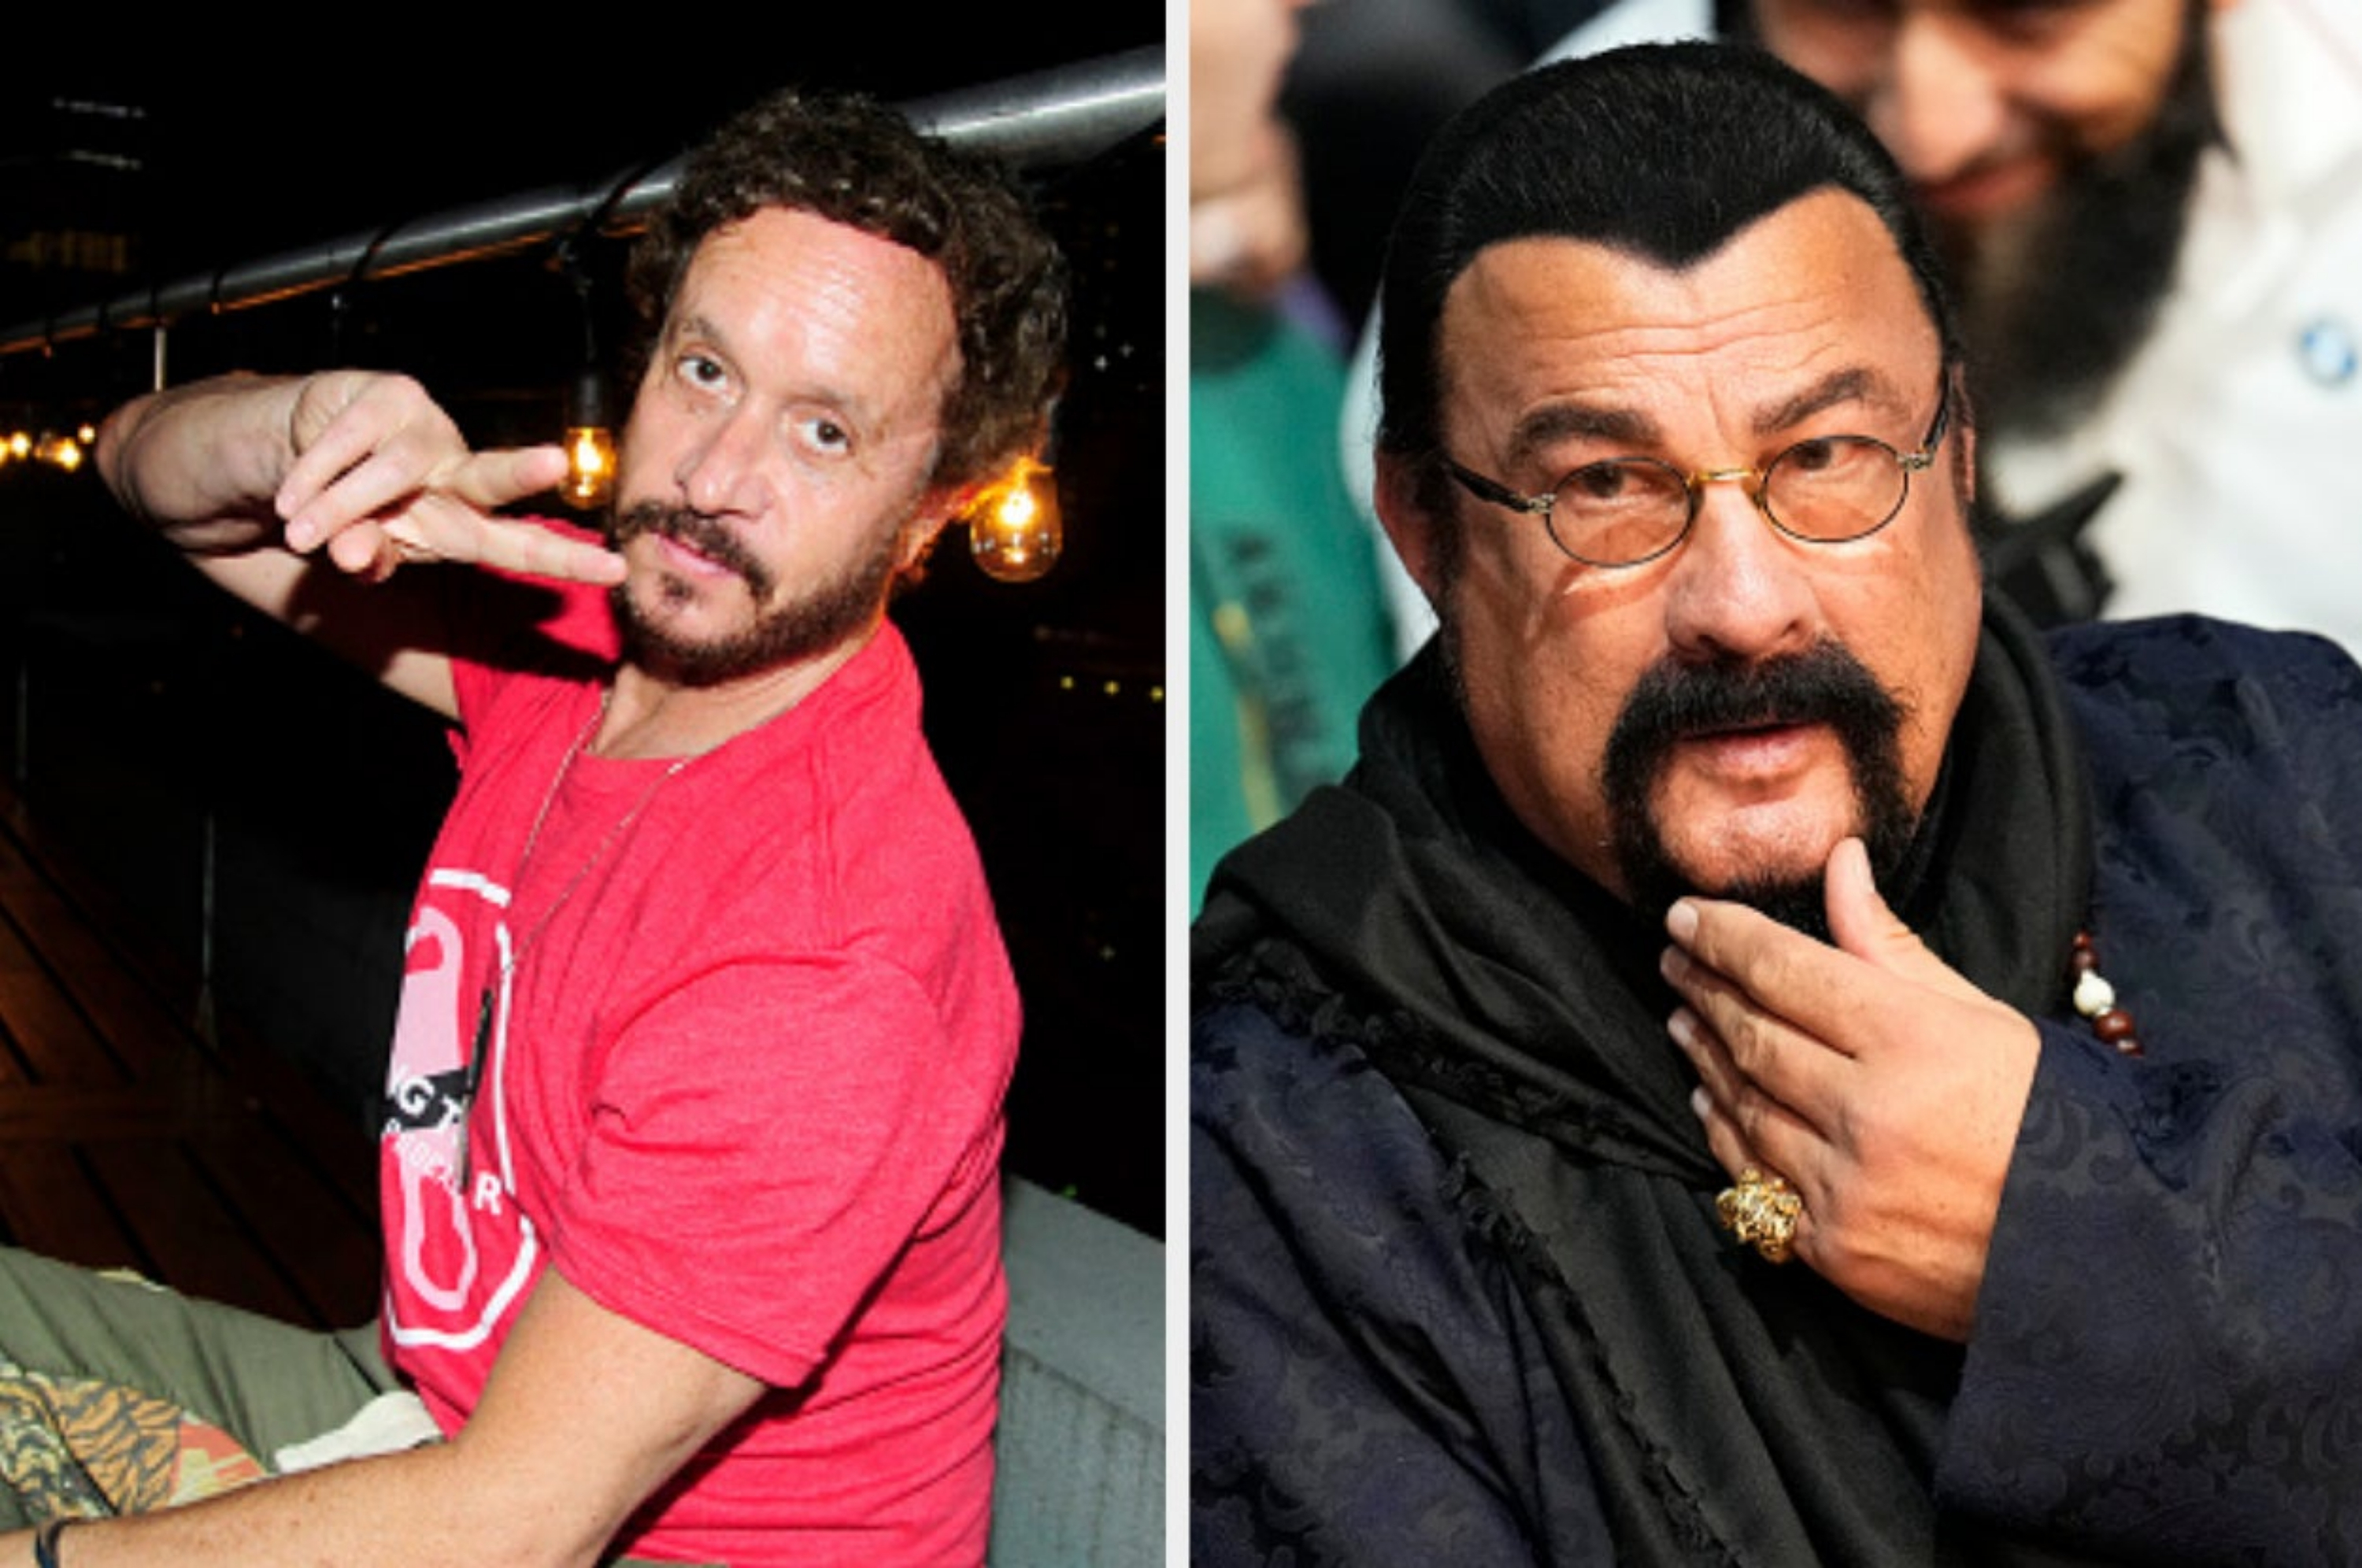 pauly giving a peace sign and a close up of steven touching his handle bars facial hair